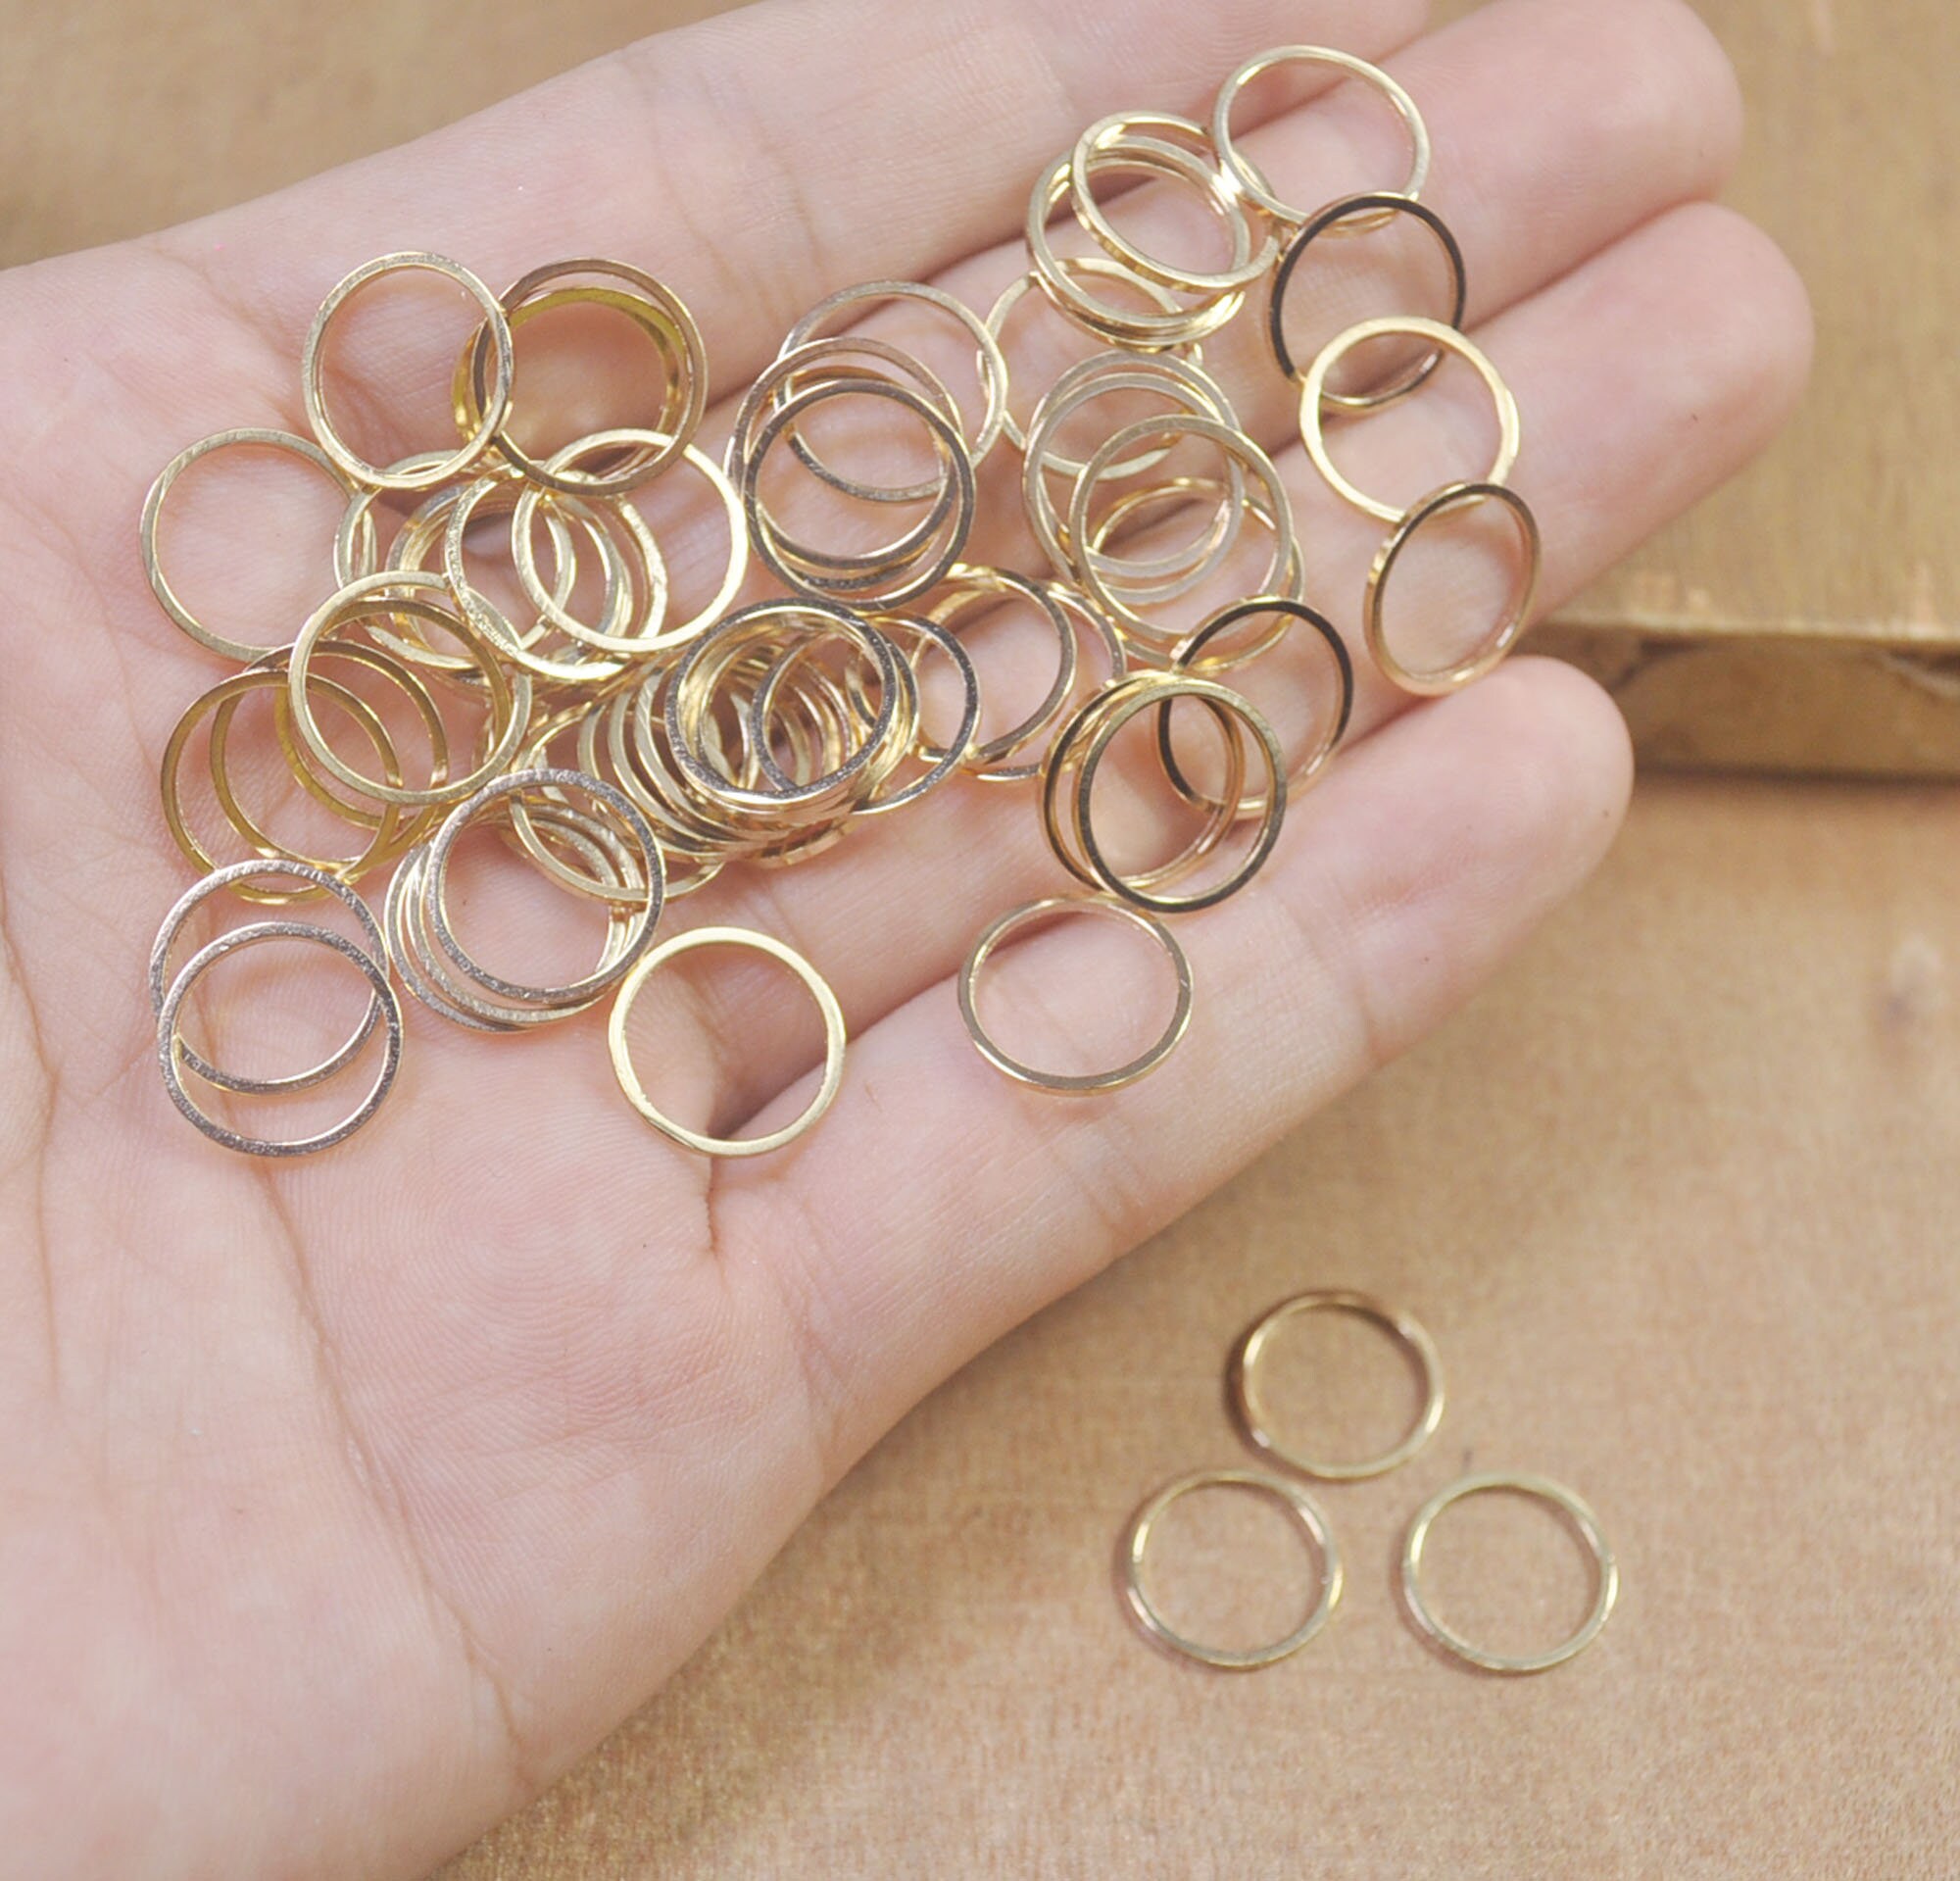 14k Gold Filled Twisted Open Jump Rings for Jewelry Making, 60Pcs  6mm/8mm/10mm Textured Gold Filled Jump Rings for Jewelry Making(Gold )  Golden -01 